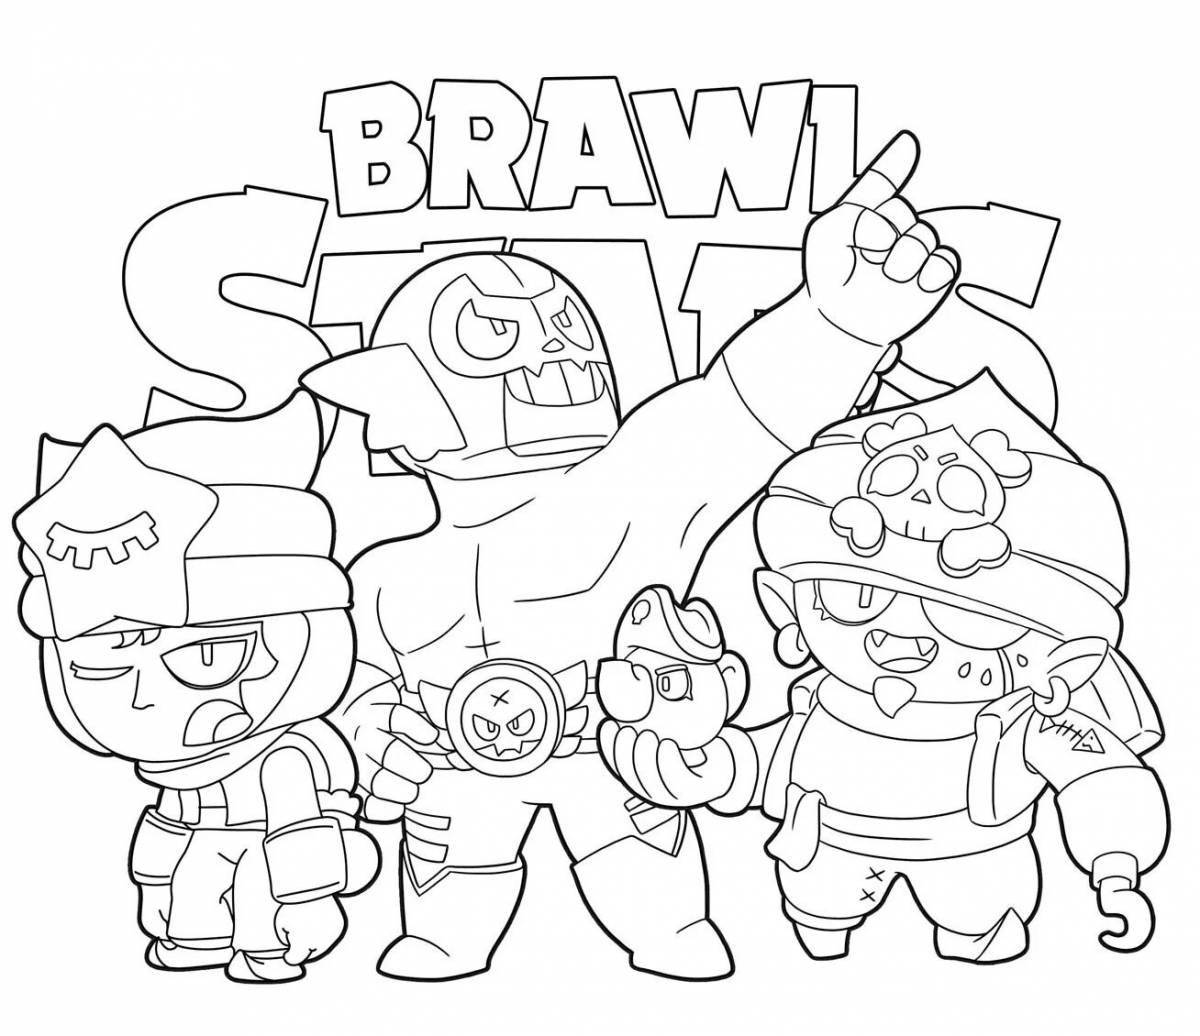 Fascinating brawl stars coloring pages